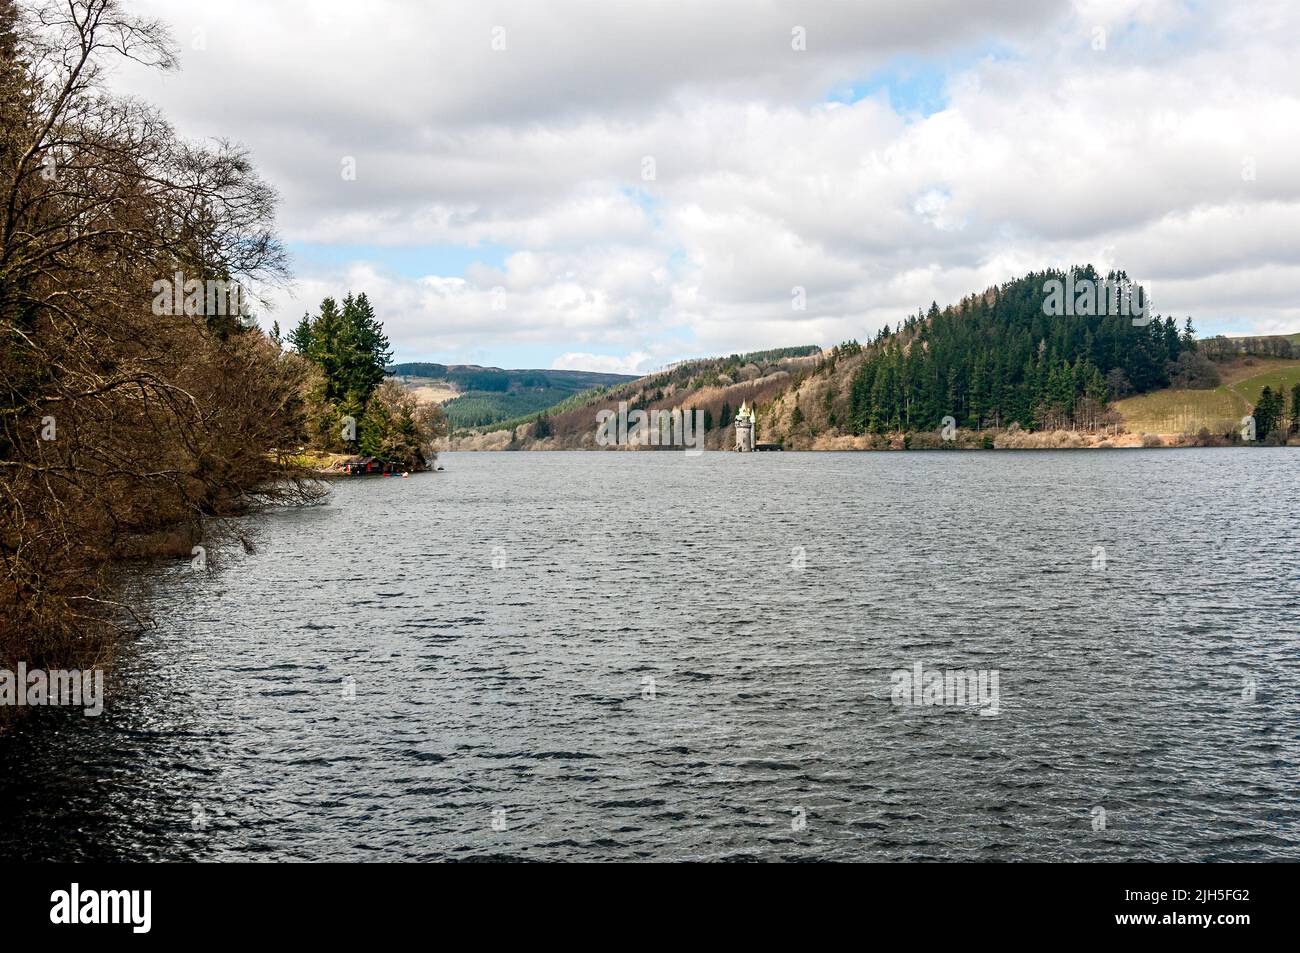 Lake Vyrnwy was created in 1888 by flooding the River Vyrnwy valley and submerging the village of Llanwddyn to supply fresh clean water to Liverpool Stock Photo